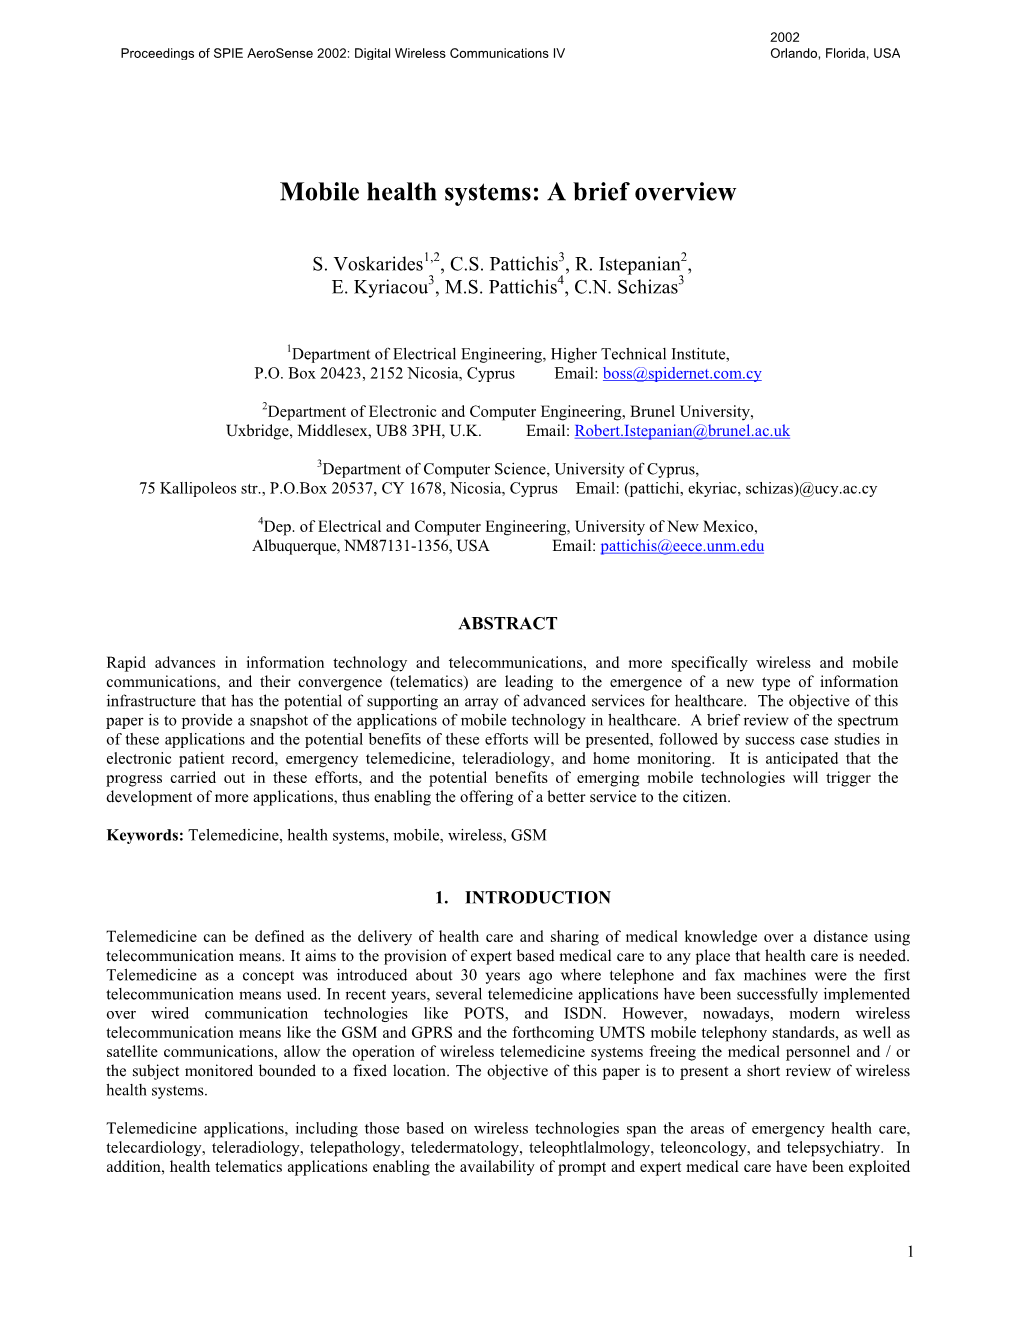 Mobile Health Systems: a Brief Overview